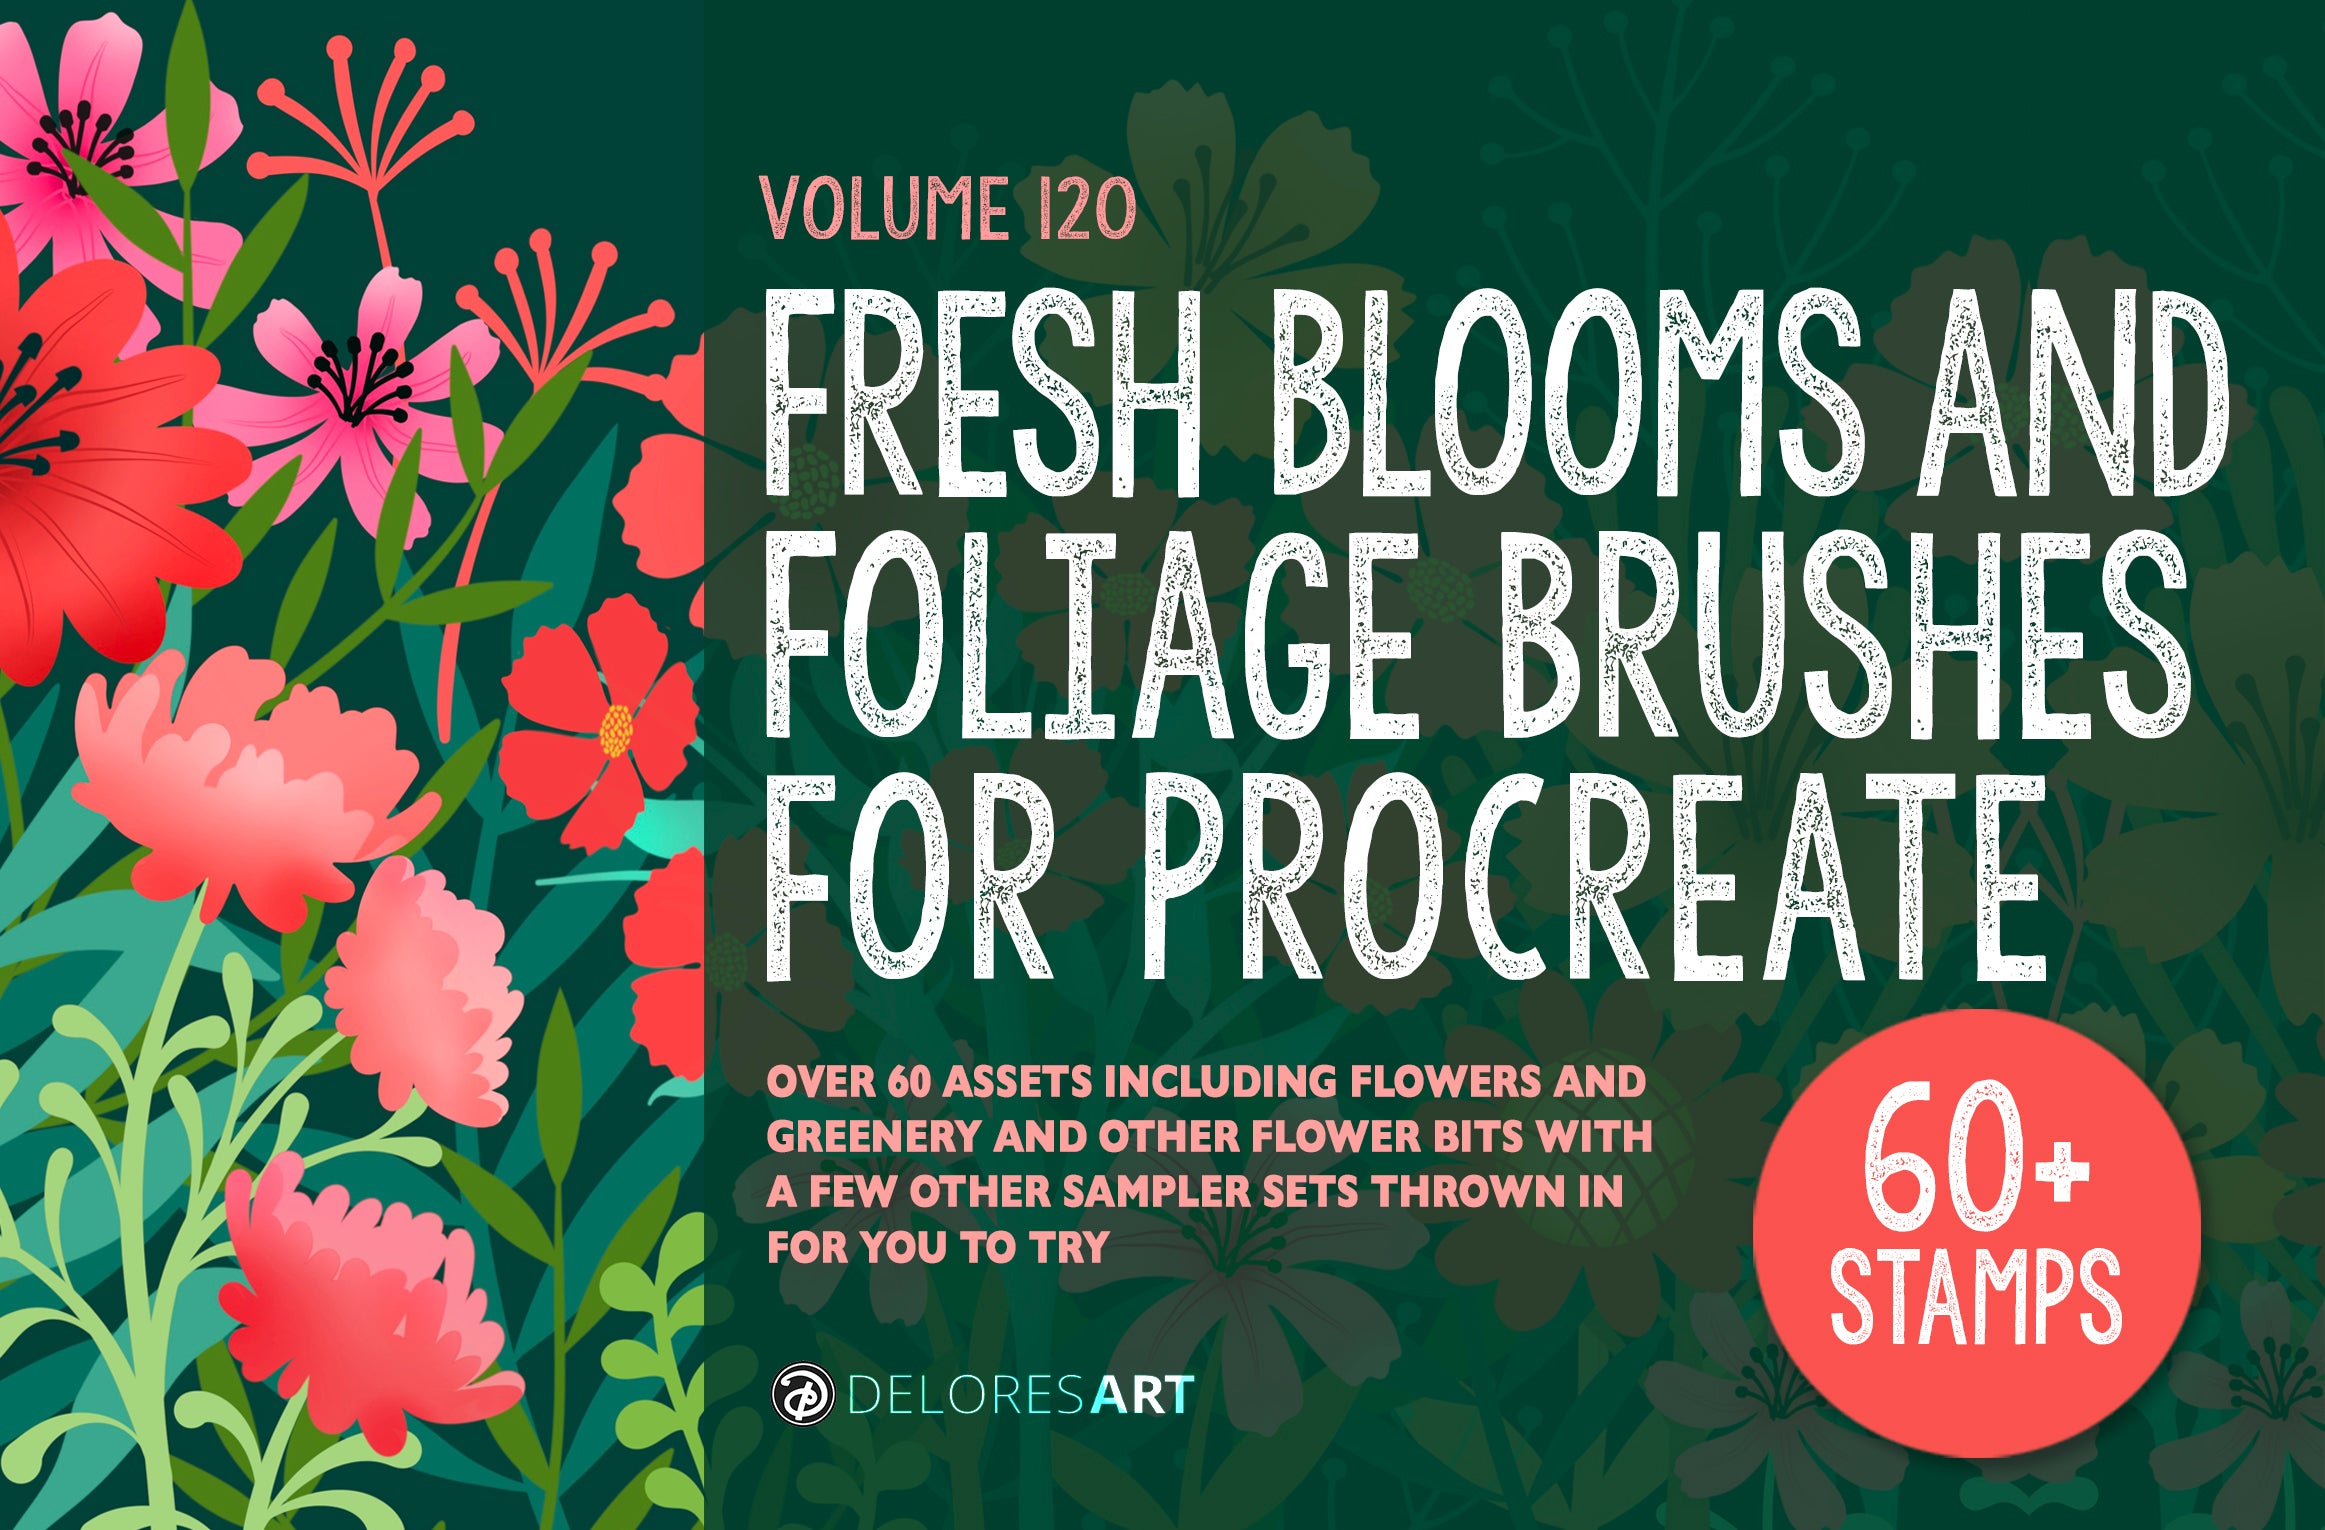 Volume 120 - Fresh Blooms and Foliage for Procreate (60) Full Set